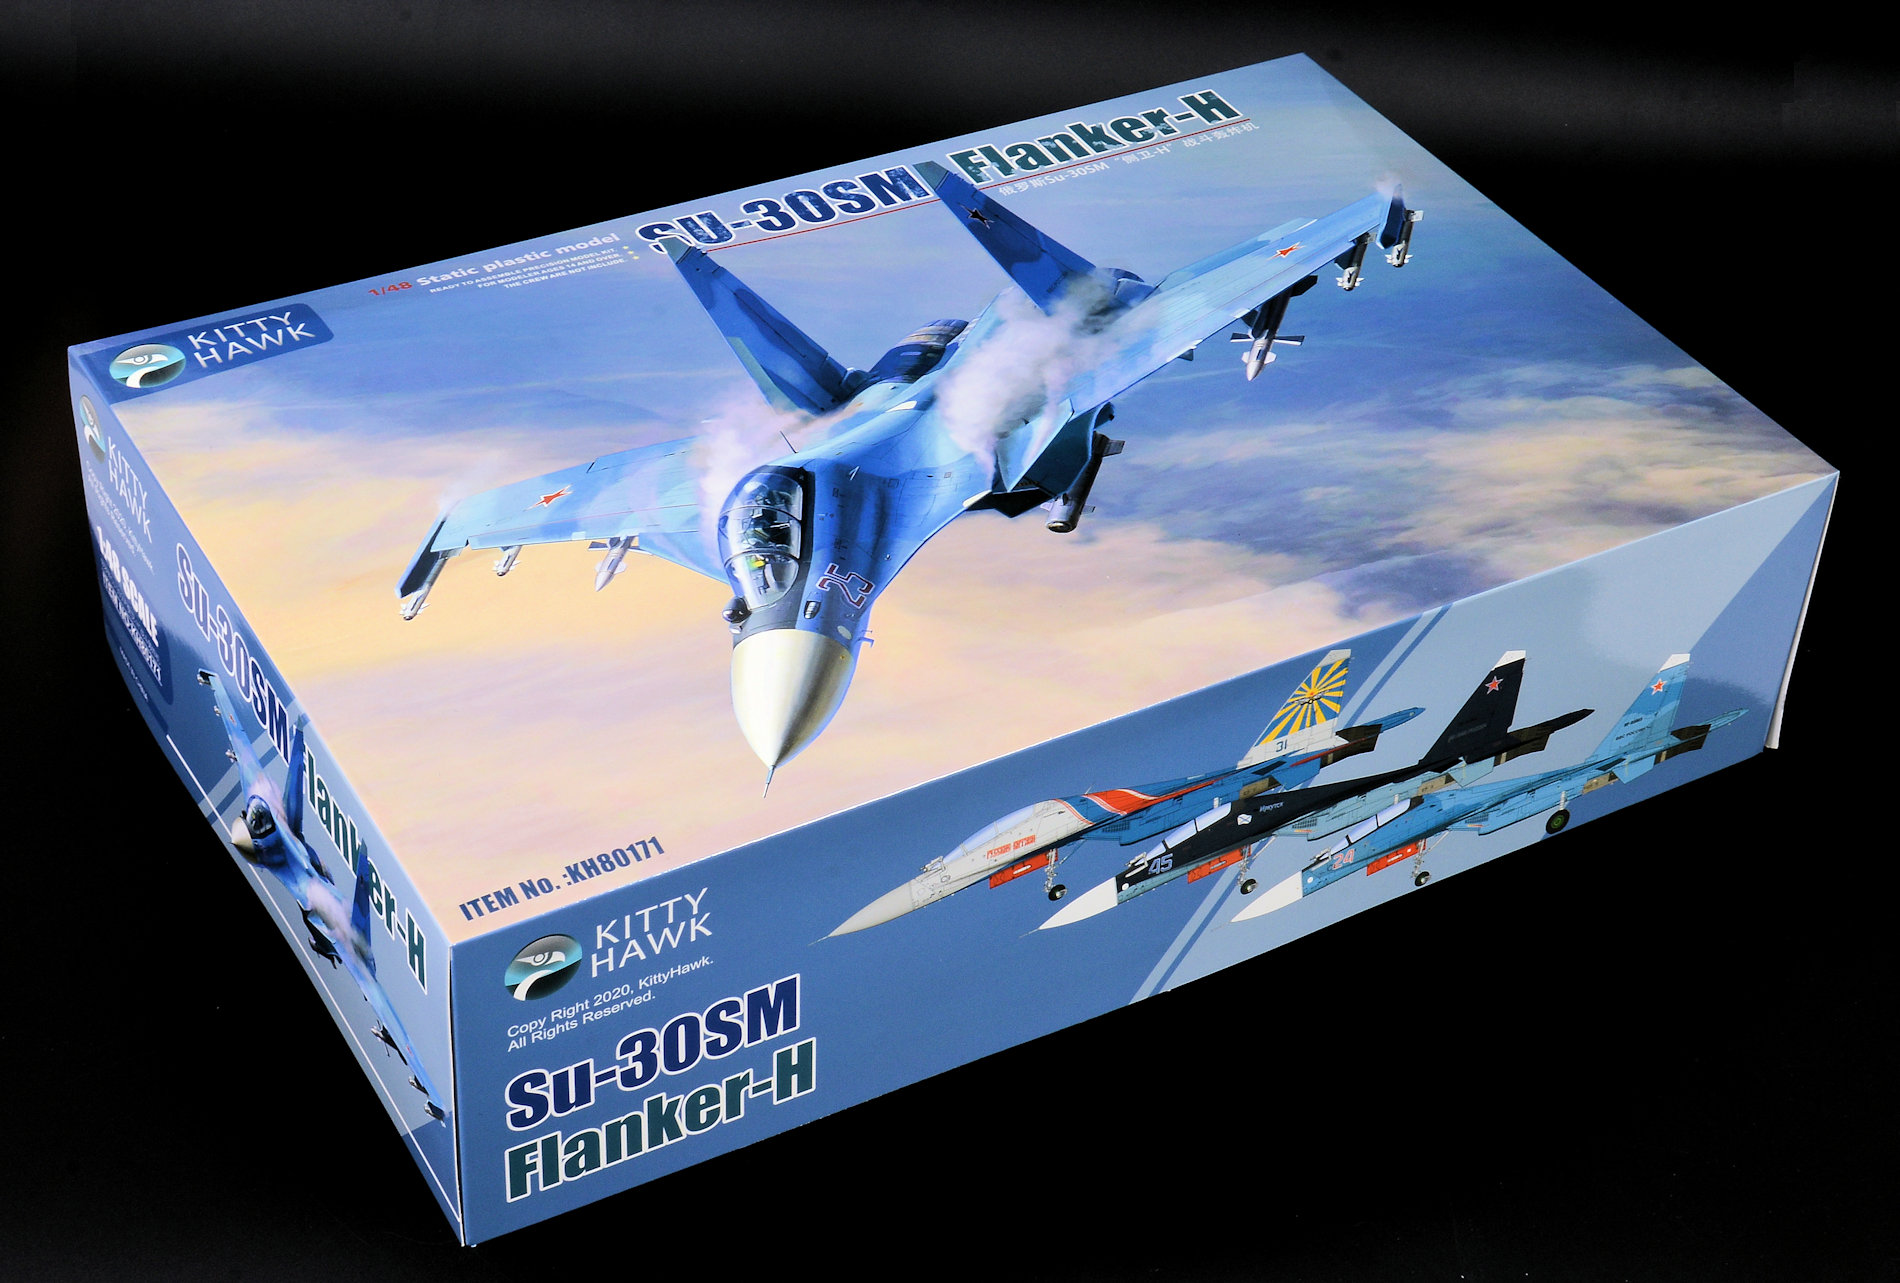 The Modelling News Build Review Pt 1 1 48th Scale Sukhoi Su 30sm Flanker C From Kittyhawk